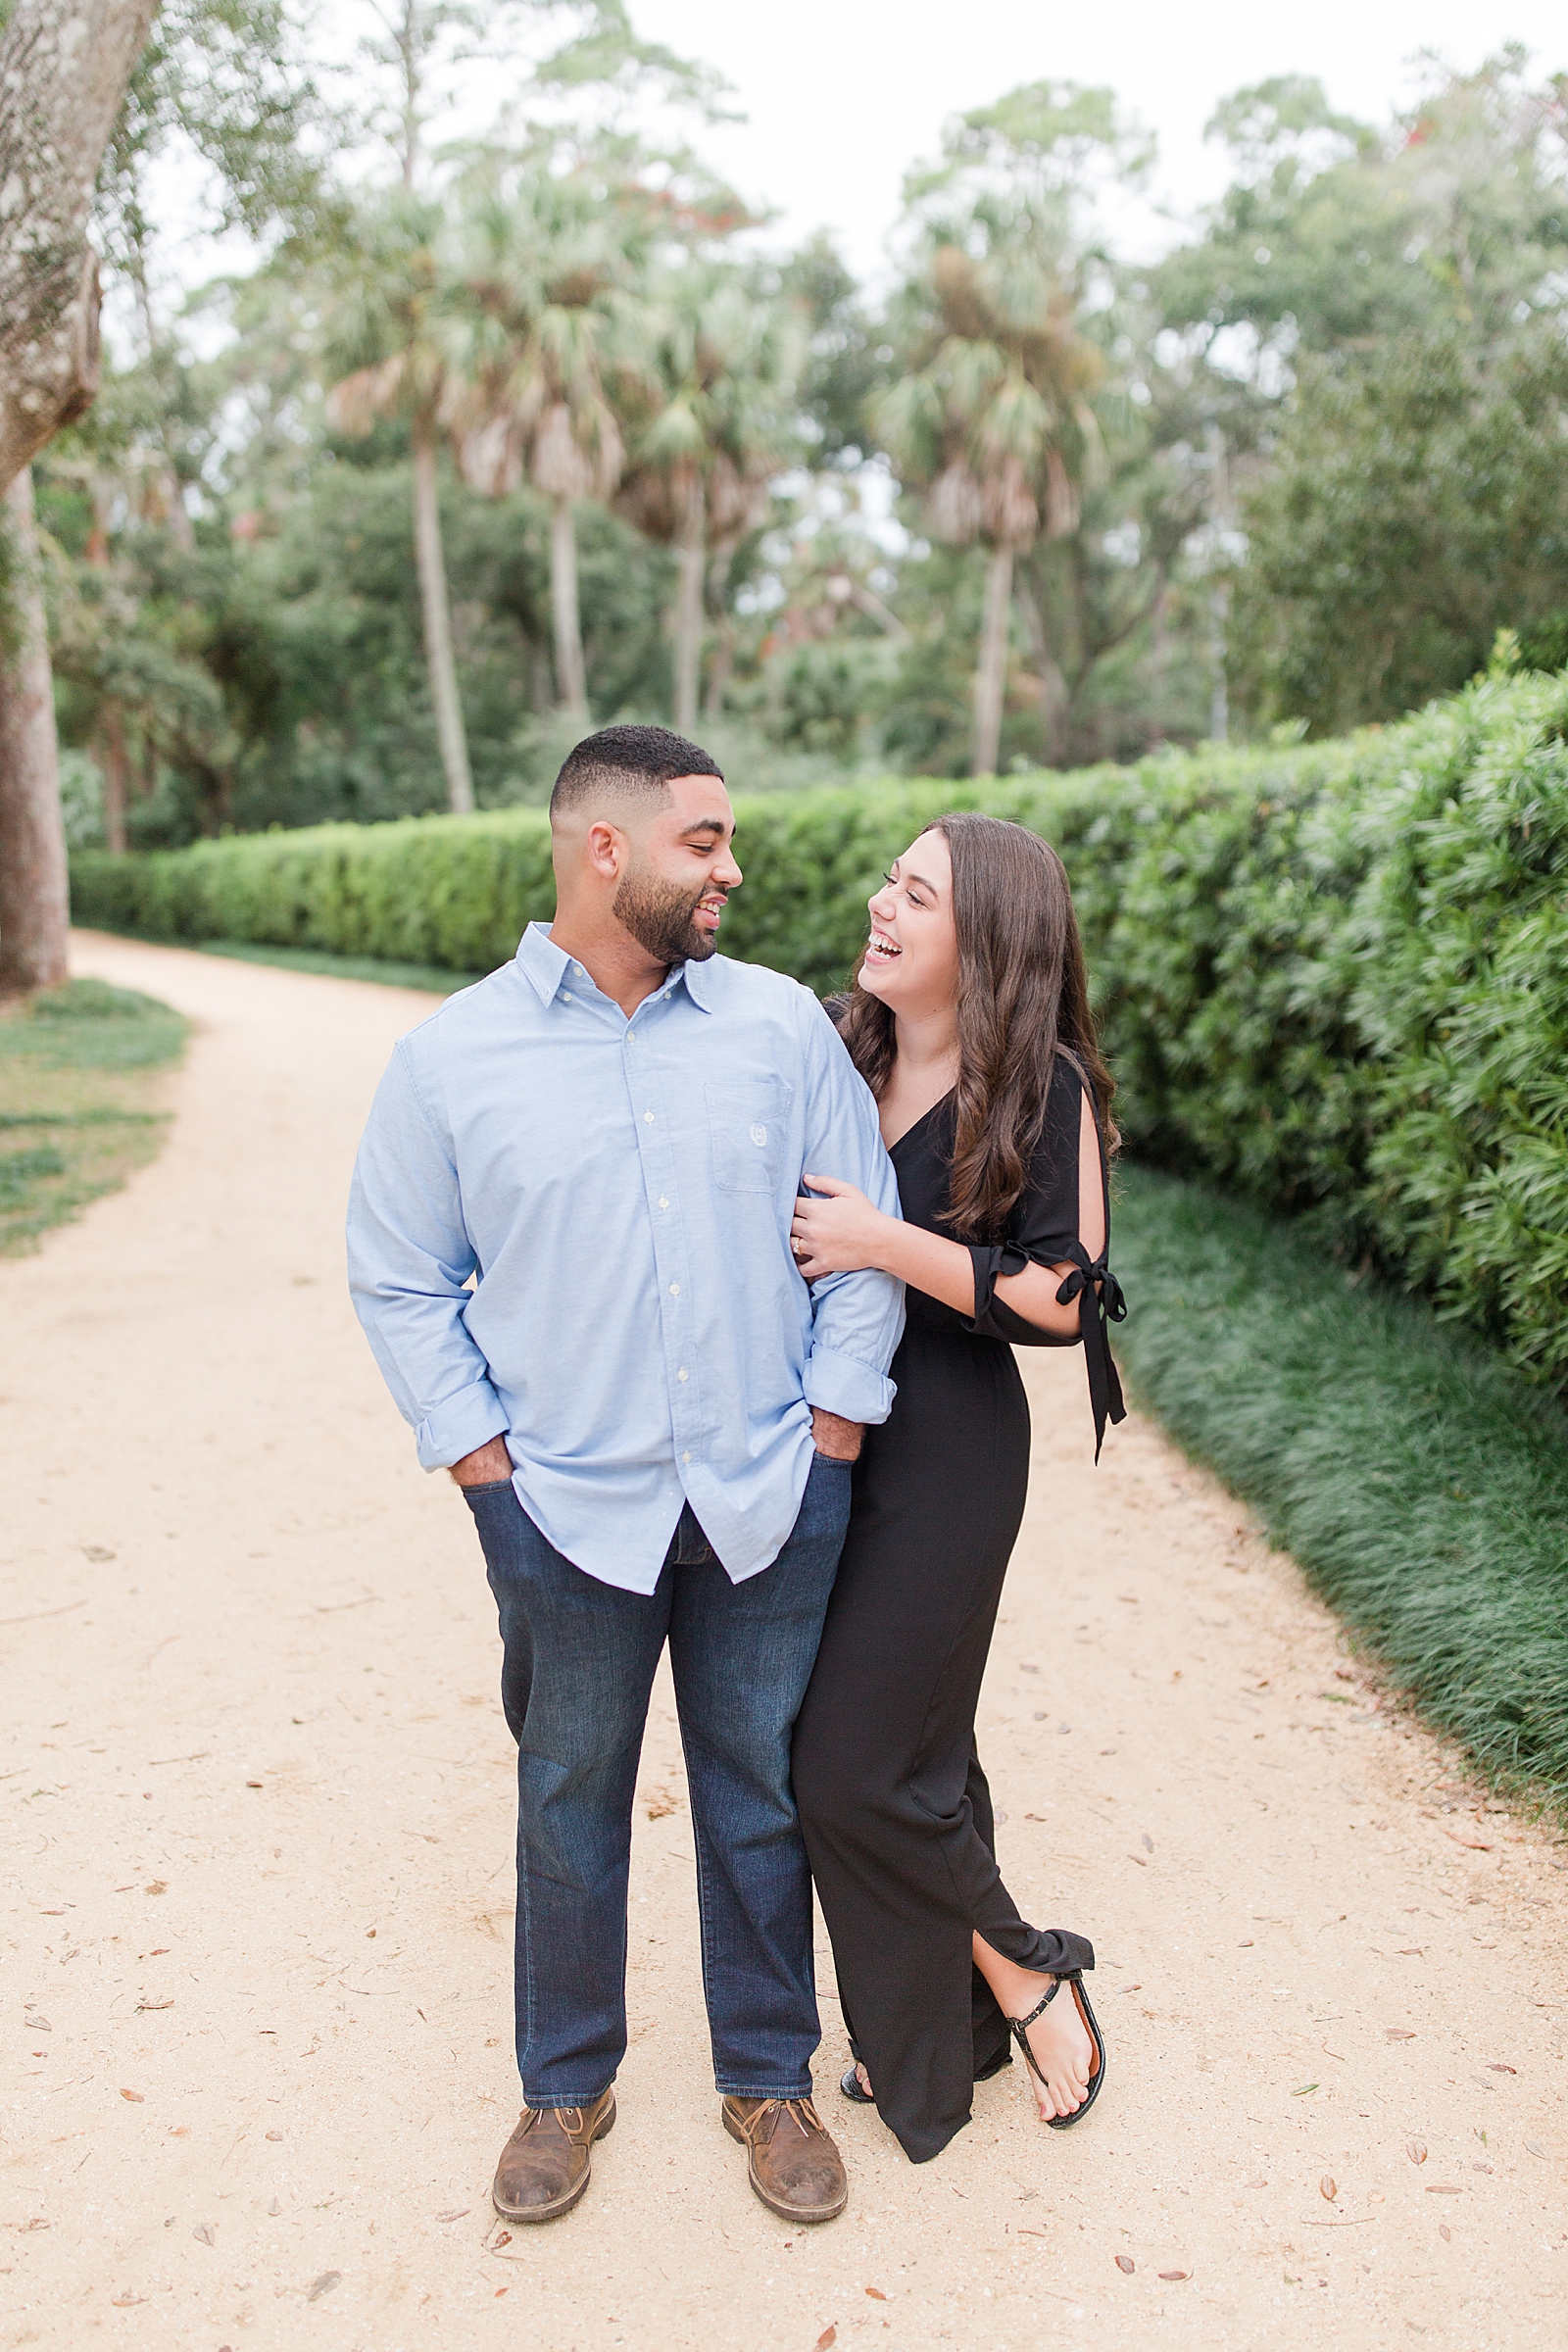 How To Have The Best Engagement Photos Couple Smiling and Hugging Photo 